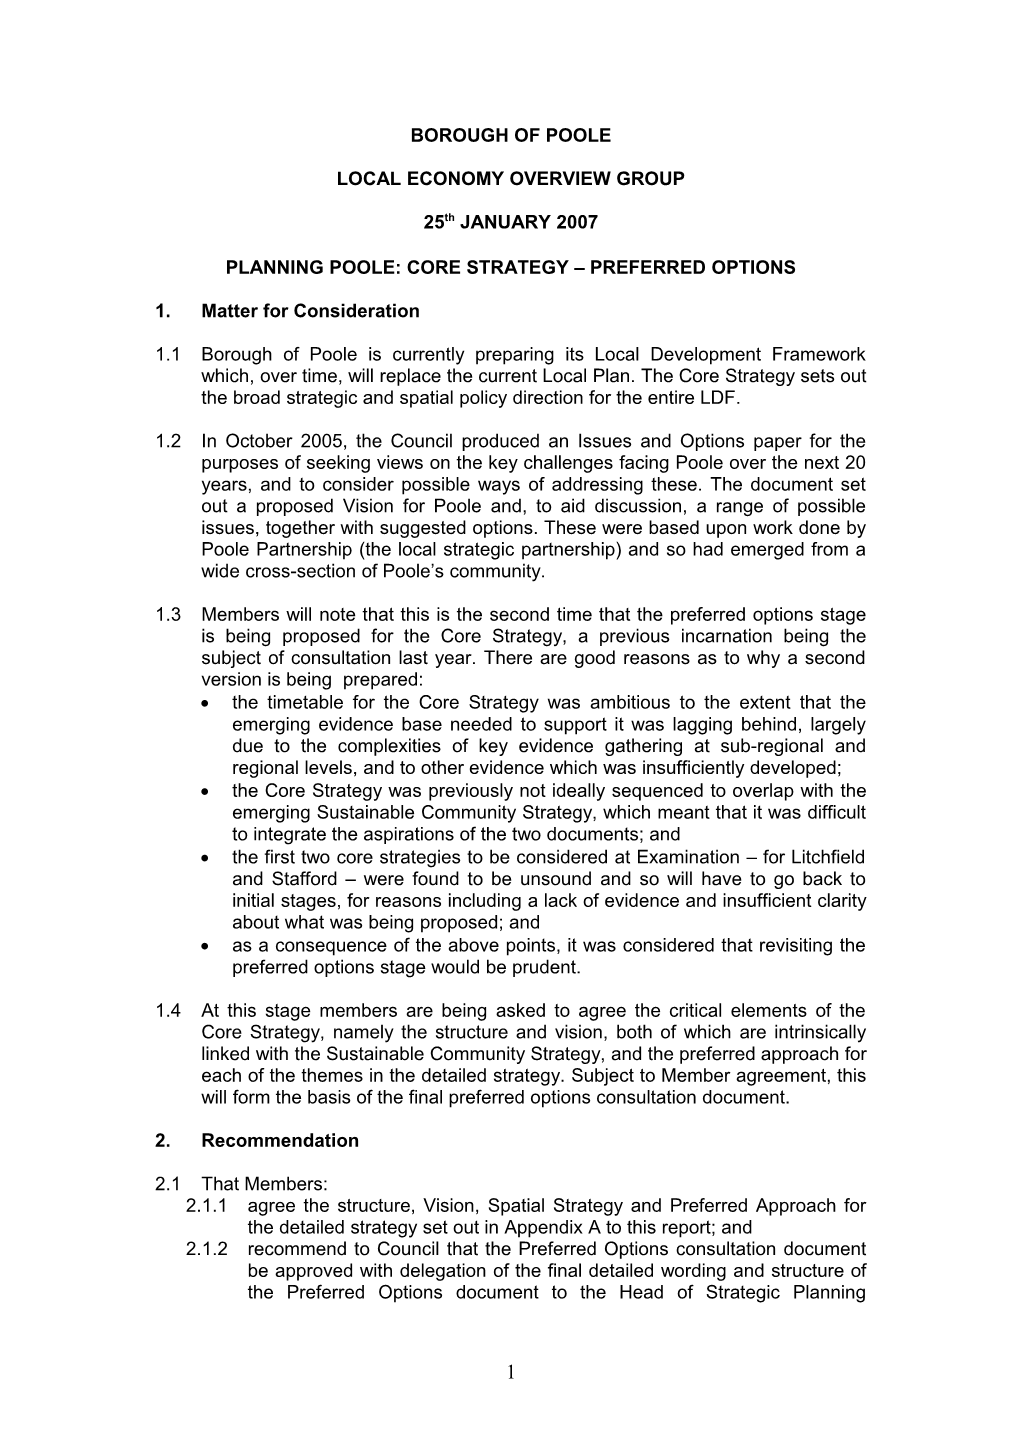 Planning Poole: Core Strategy - Preferred Options